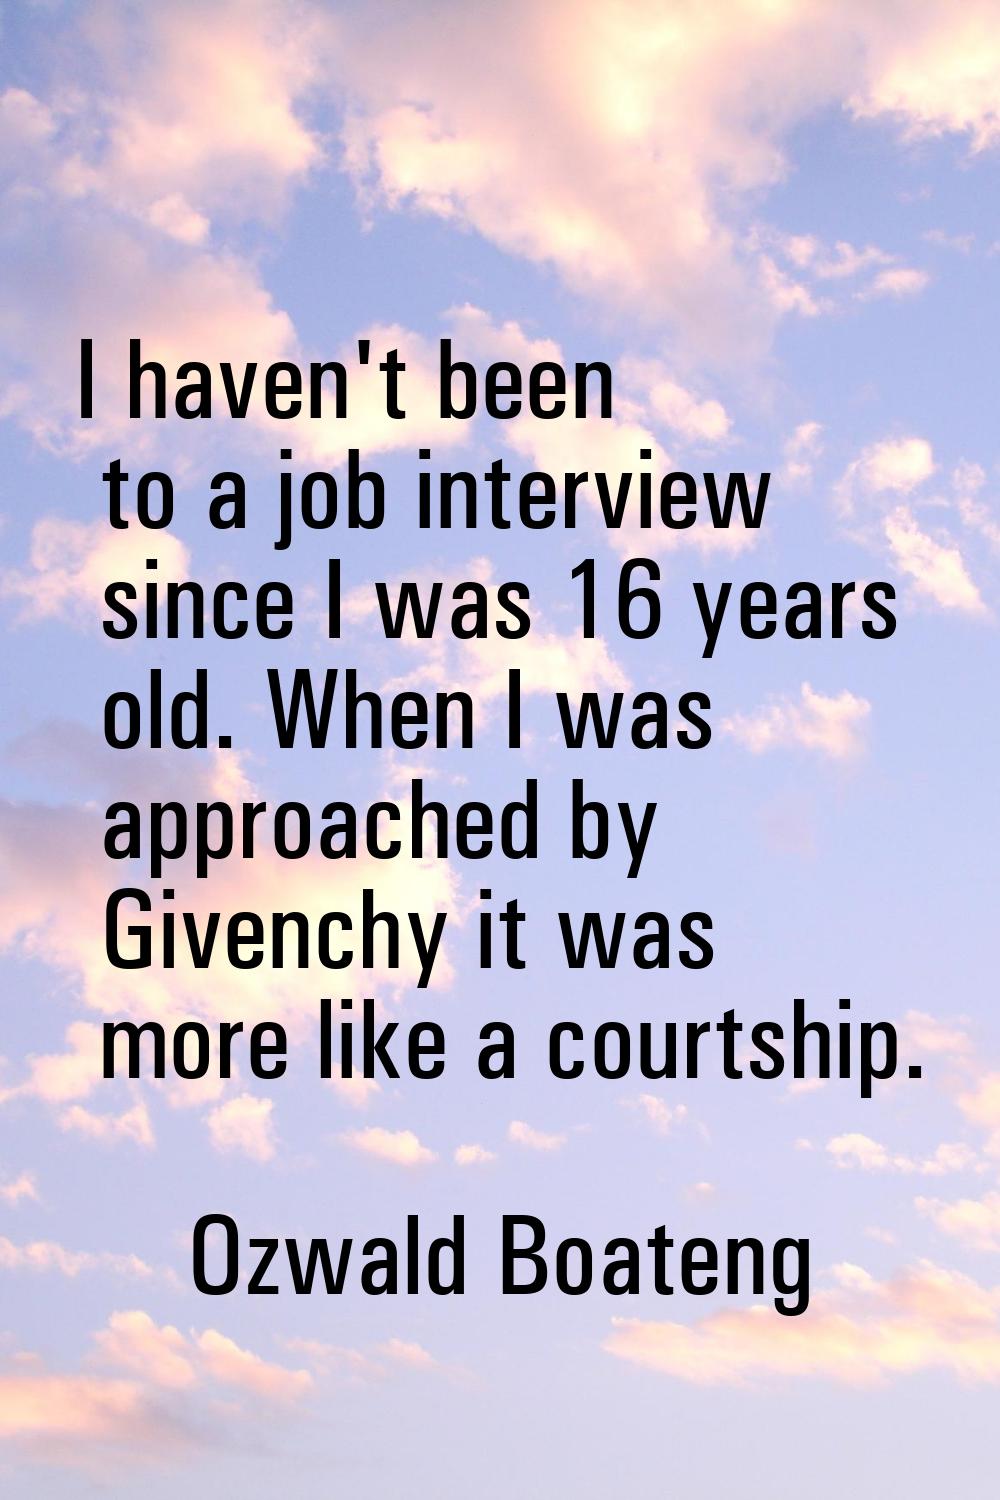 I haven't been to a job interview since I was 16 years old. When I was approached by Givenchy it wa